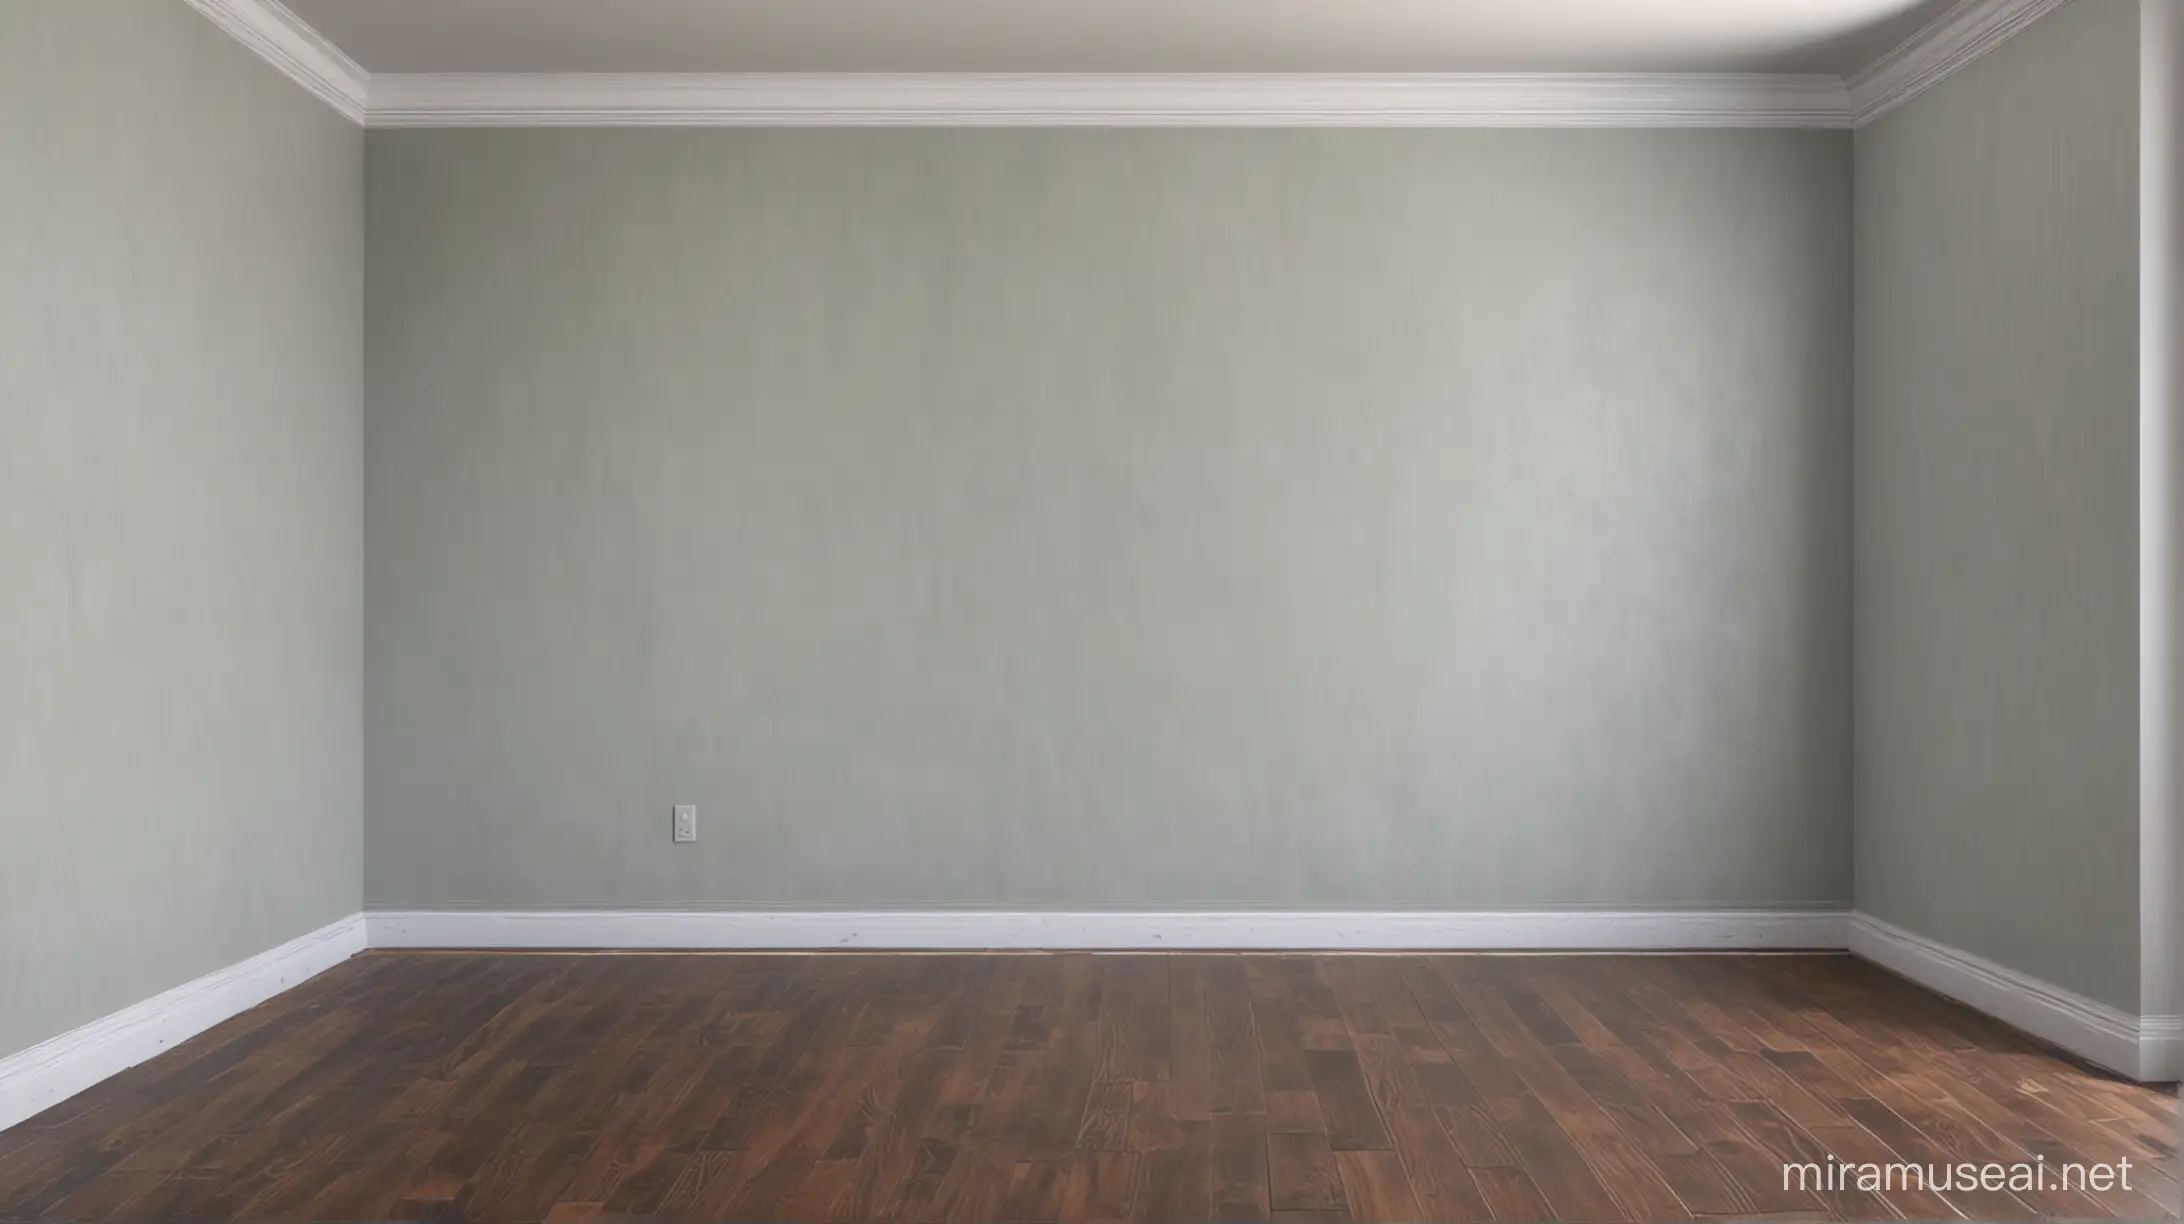 Realistic Colored Wall in an Empty Room Capturing Ambiance and Texture